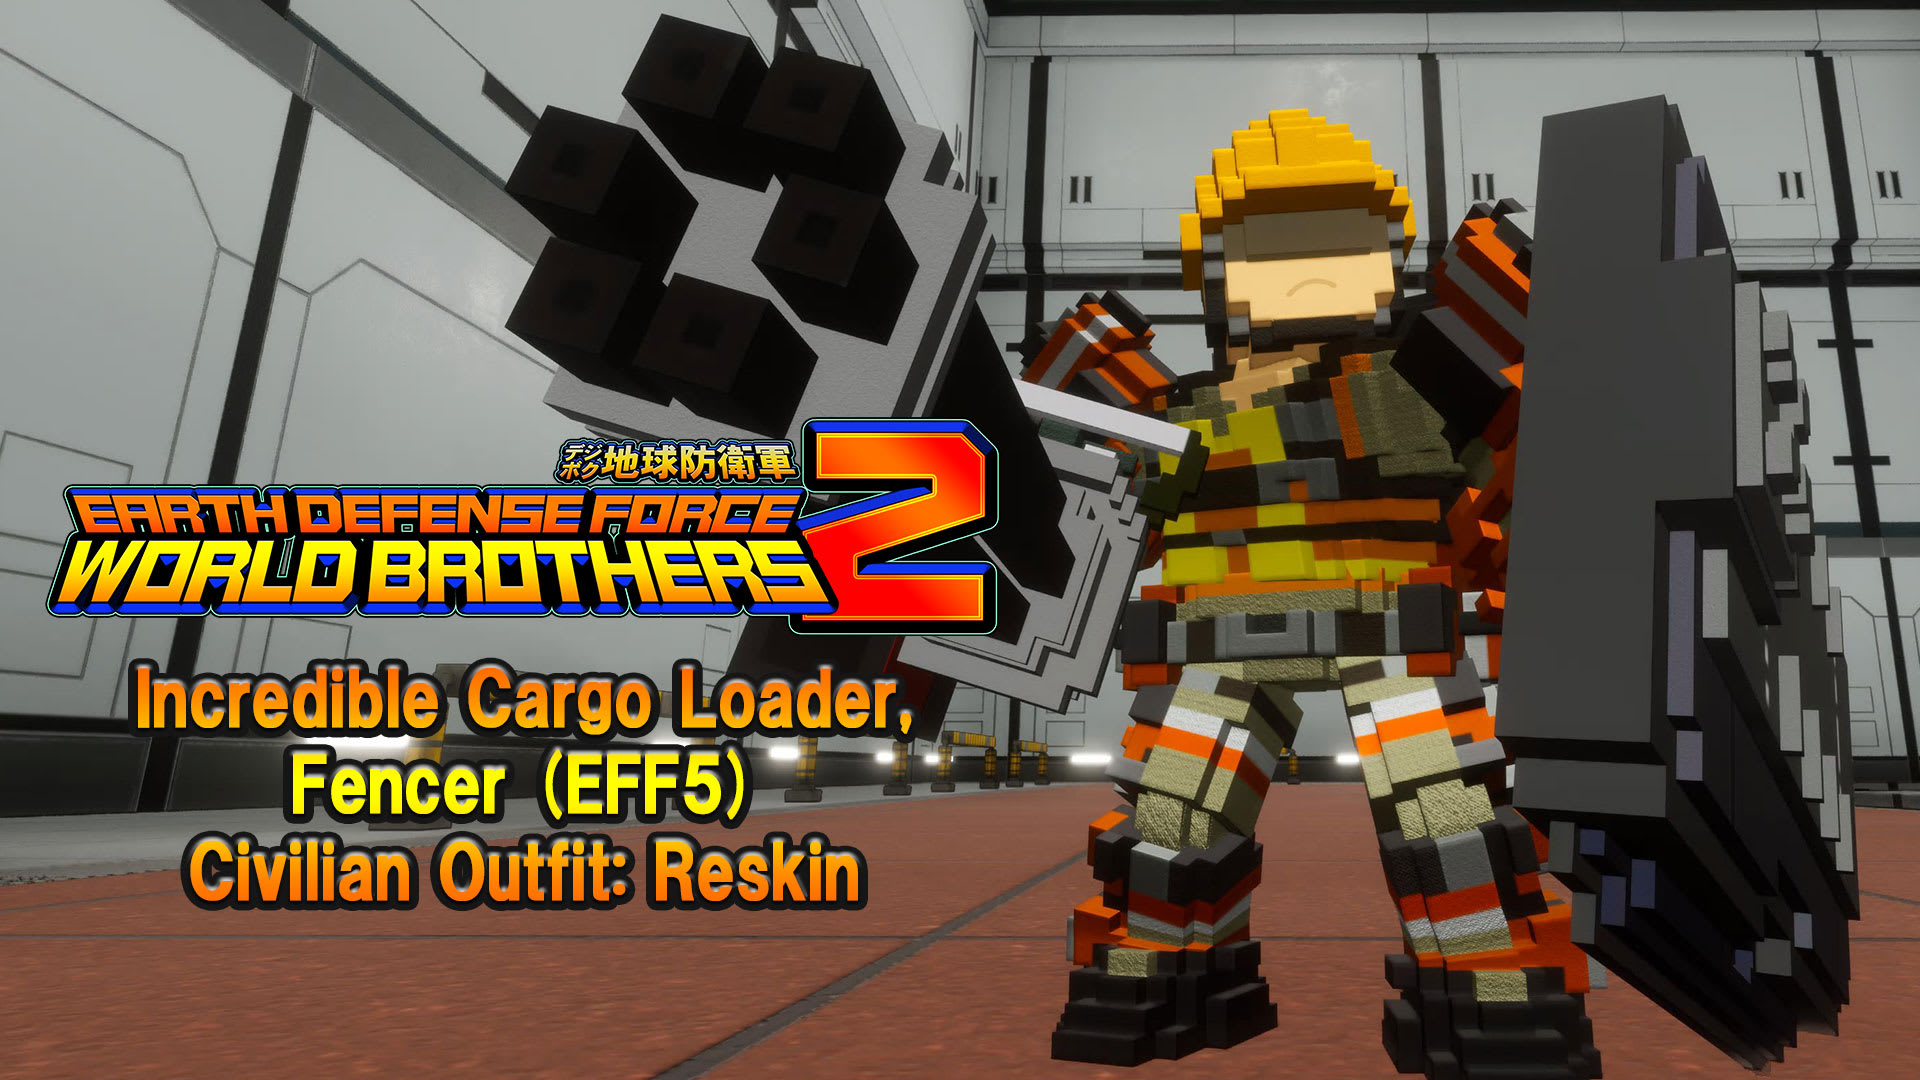 "Additional character" Incredible Cargo Loader, Fencer (EDF5) Civilian Outfit: Reskin